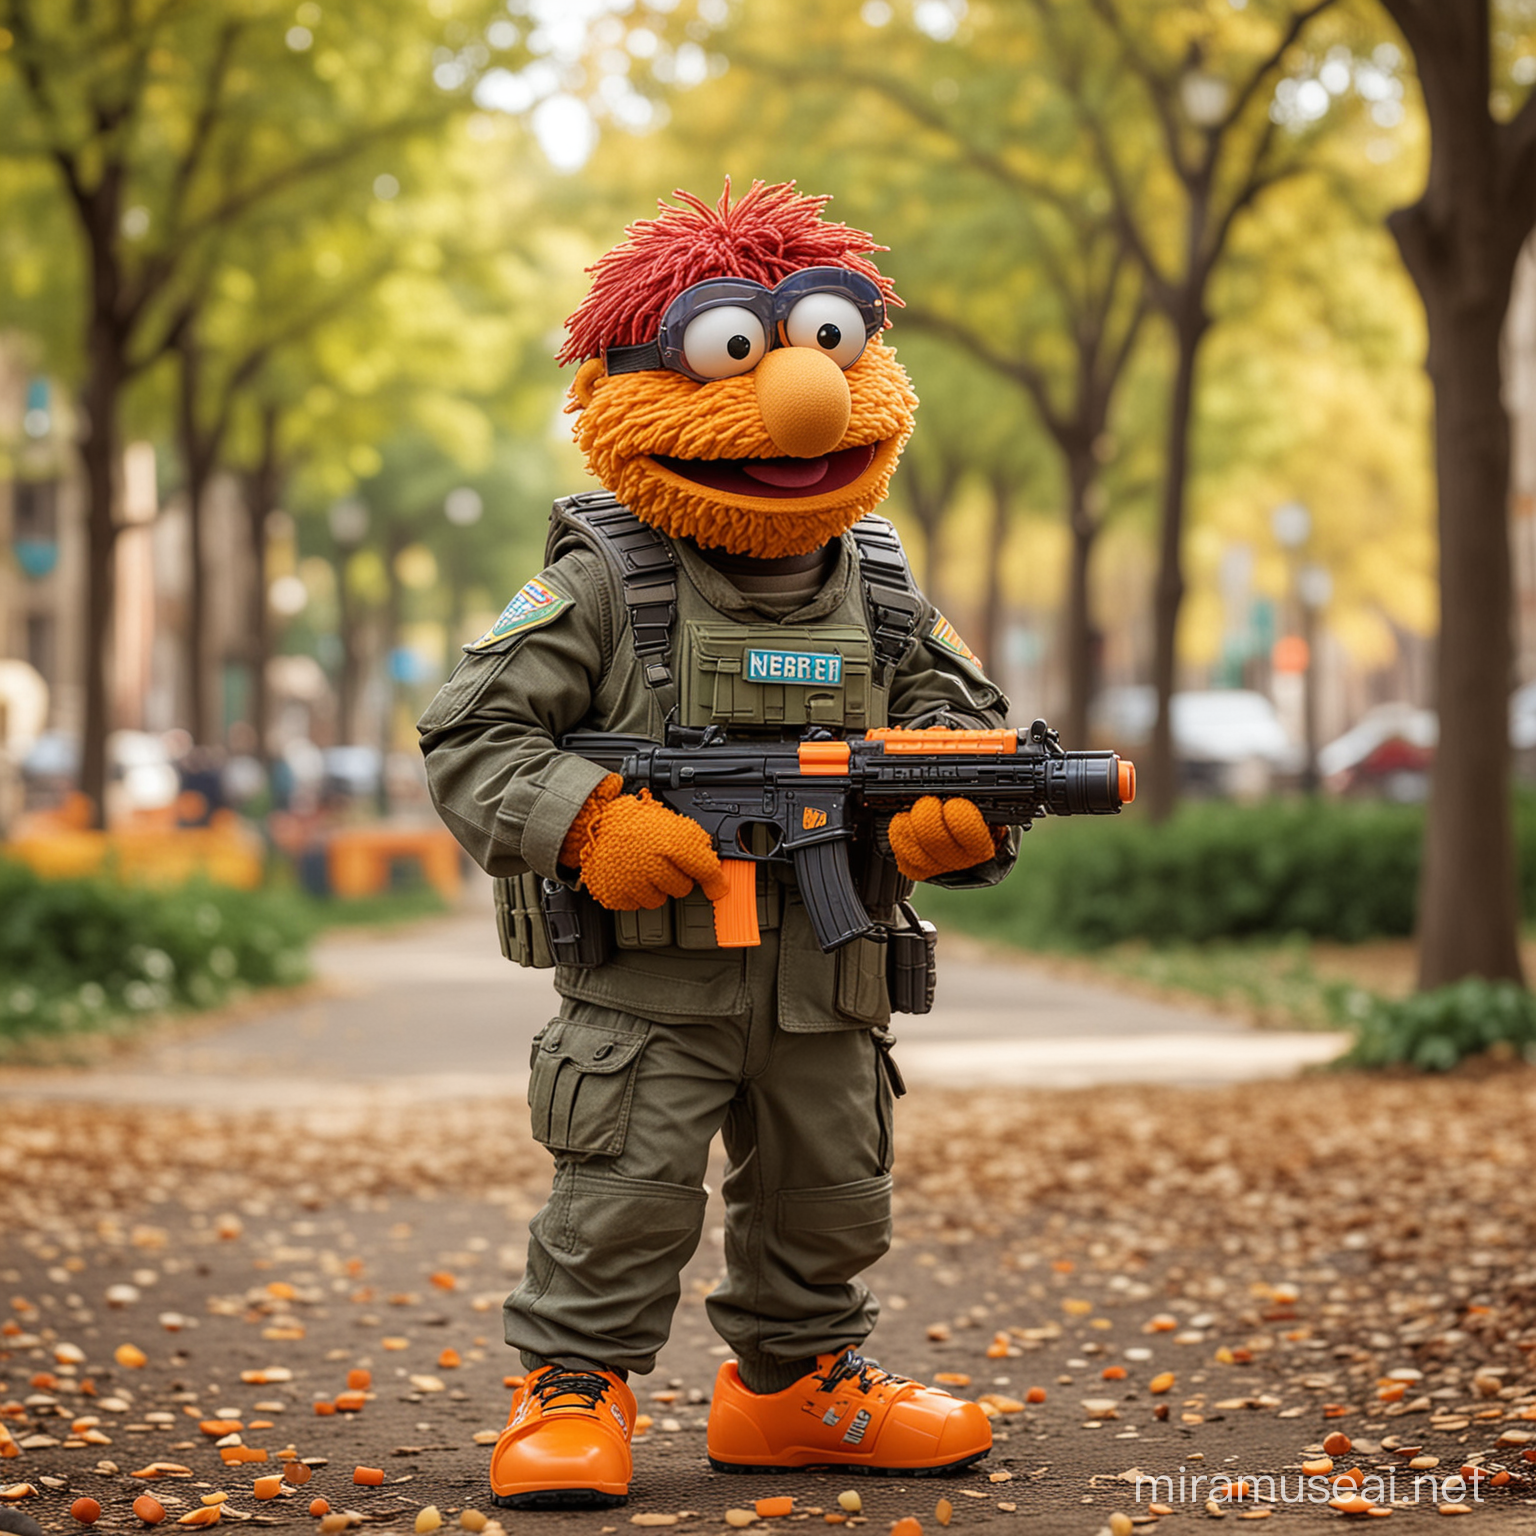 Ernie from Sesame Street wearing combat gear, playing with Nerf gun in a city park, dynamic motion, bokeh background